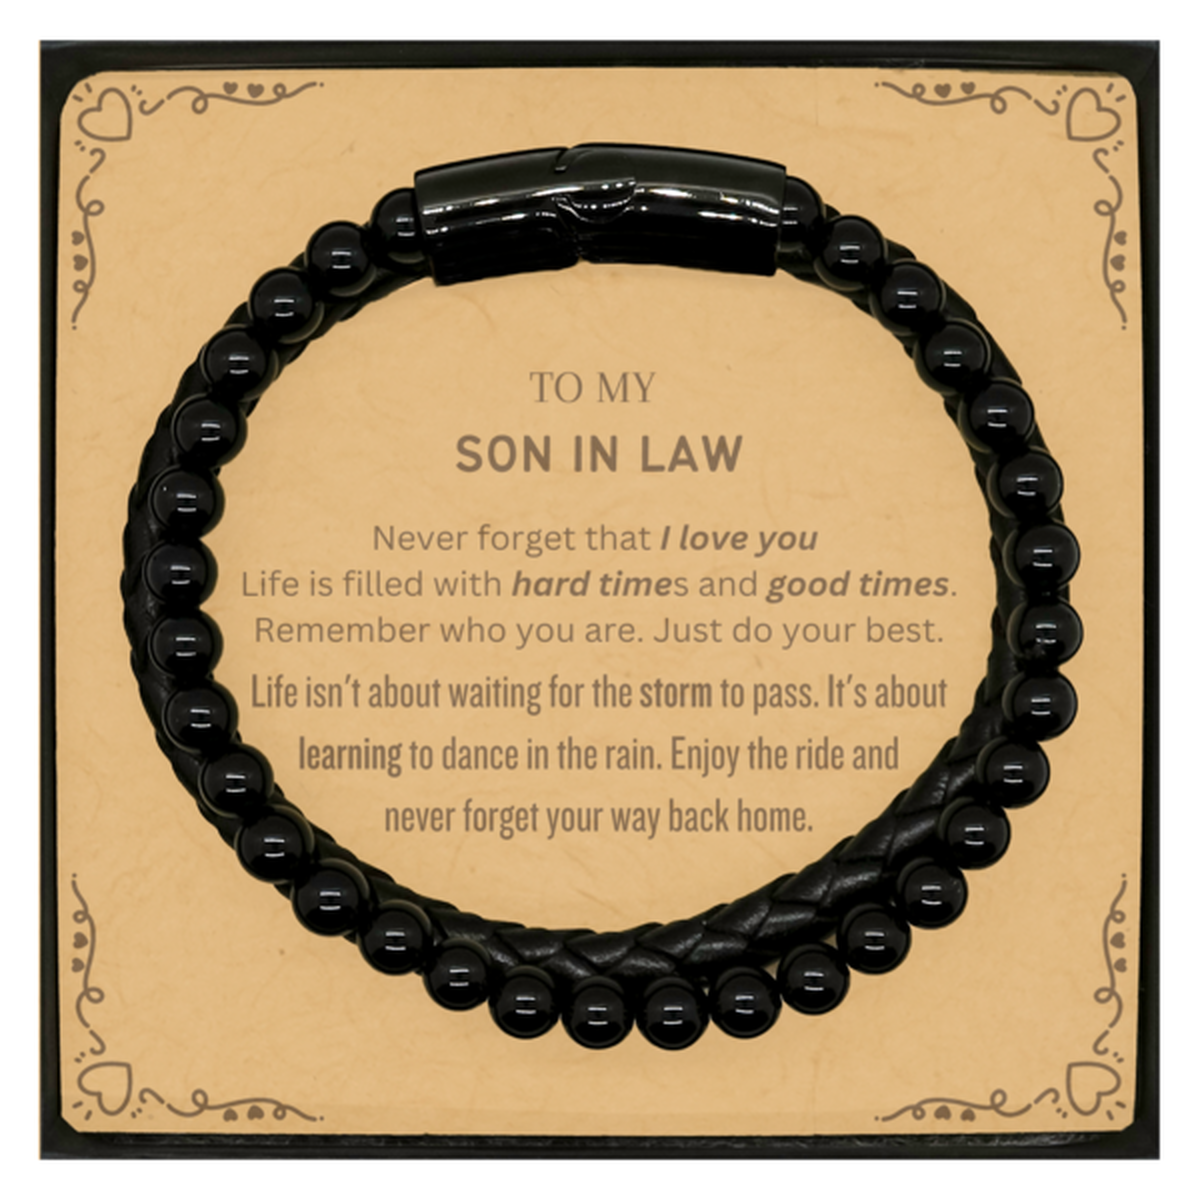 Christmas Son In Law Stone Leather Bracelets Gifts, To My Son In Law Birthday Thank You Gifts For Son In Law, Graduation Unique Gifts For Son In Law To My Son In Law Never forget that I love you life is filled with hard times and good times. Remember who